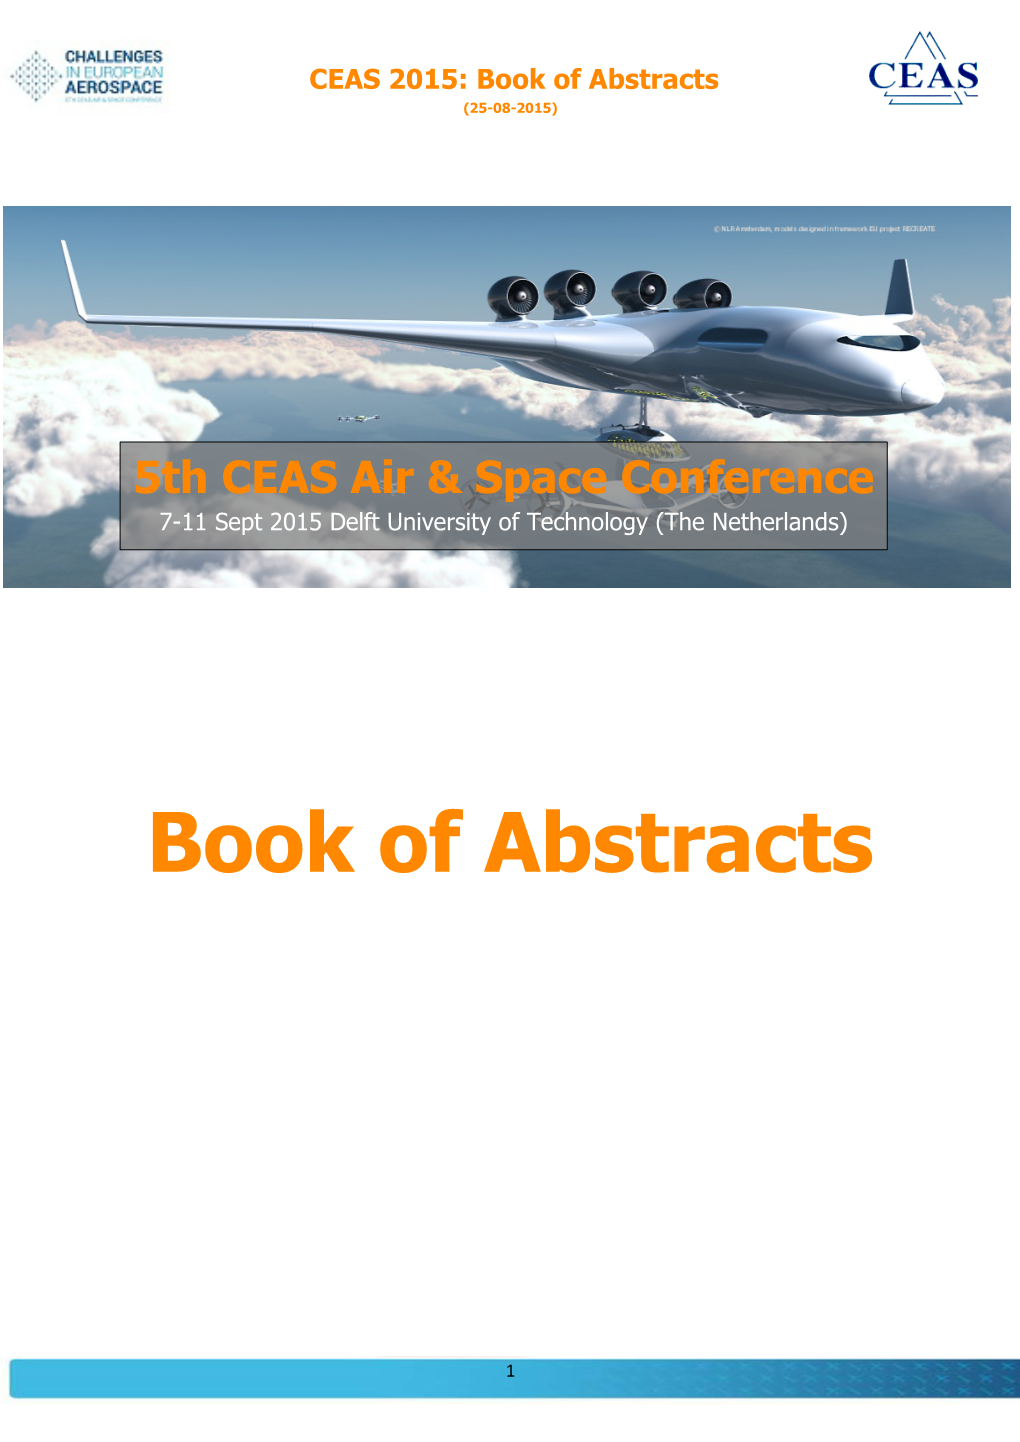 CEAS 2015: Book of Abstracts (25-08-2015)